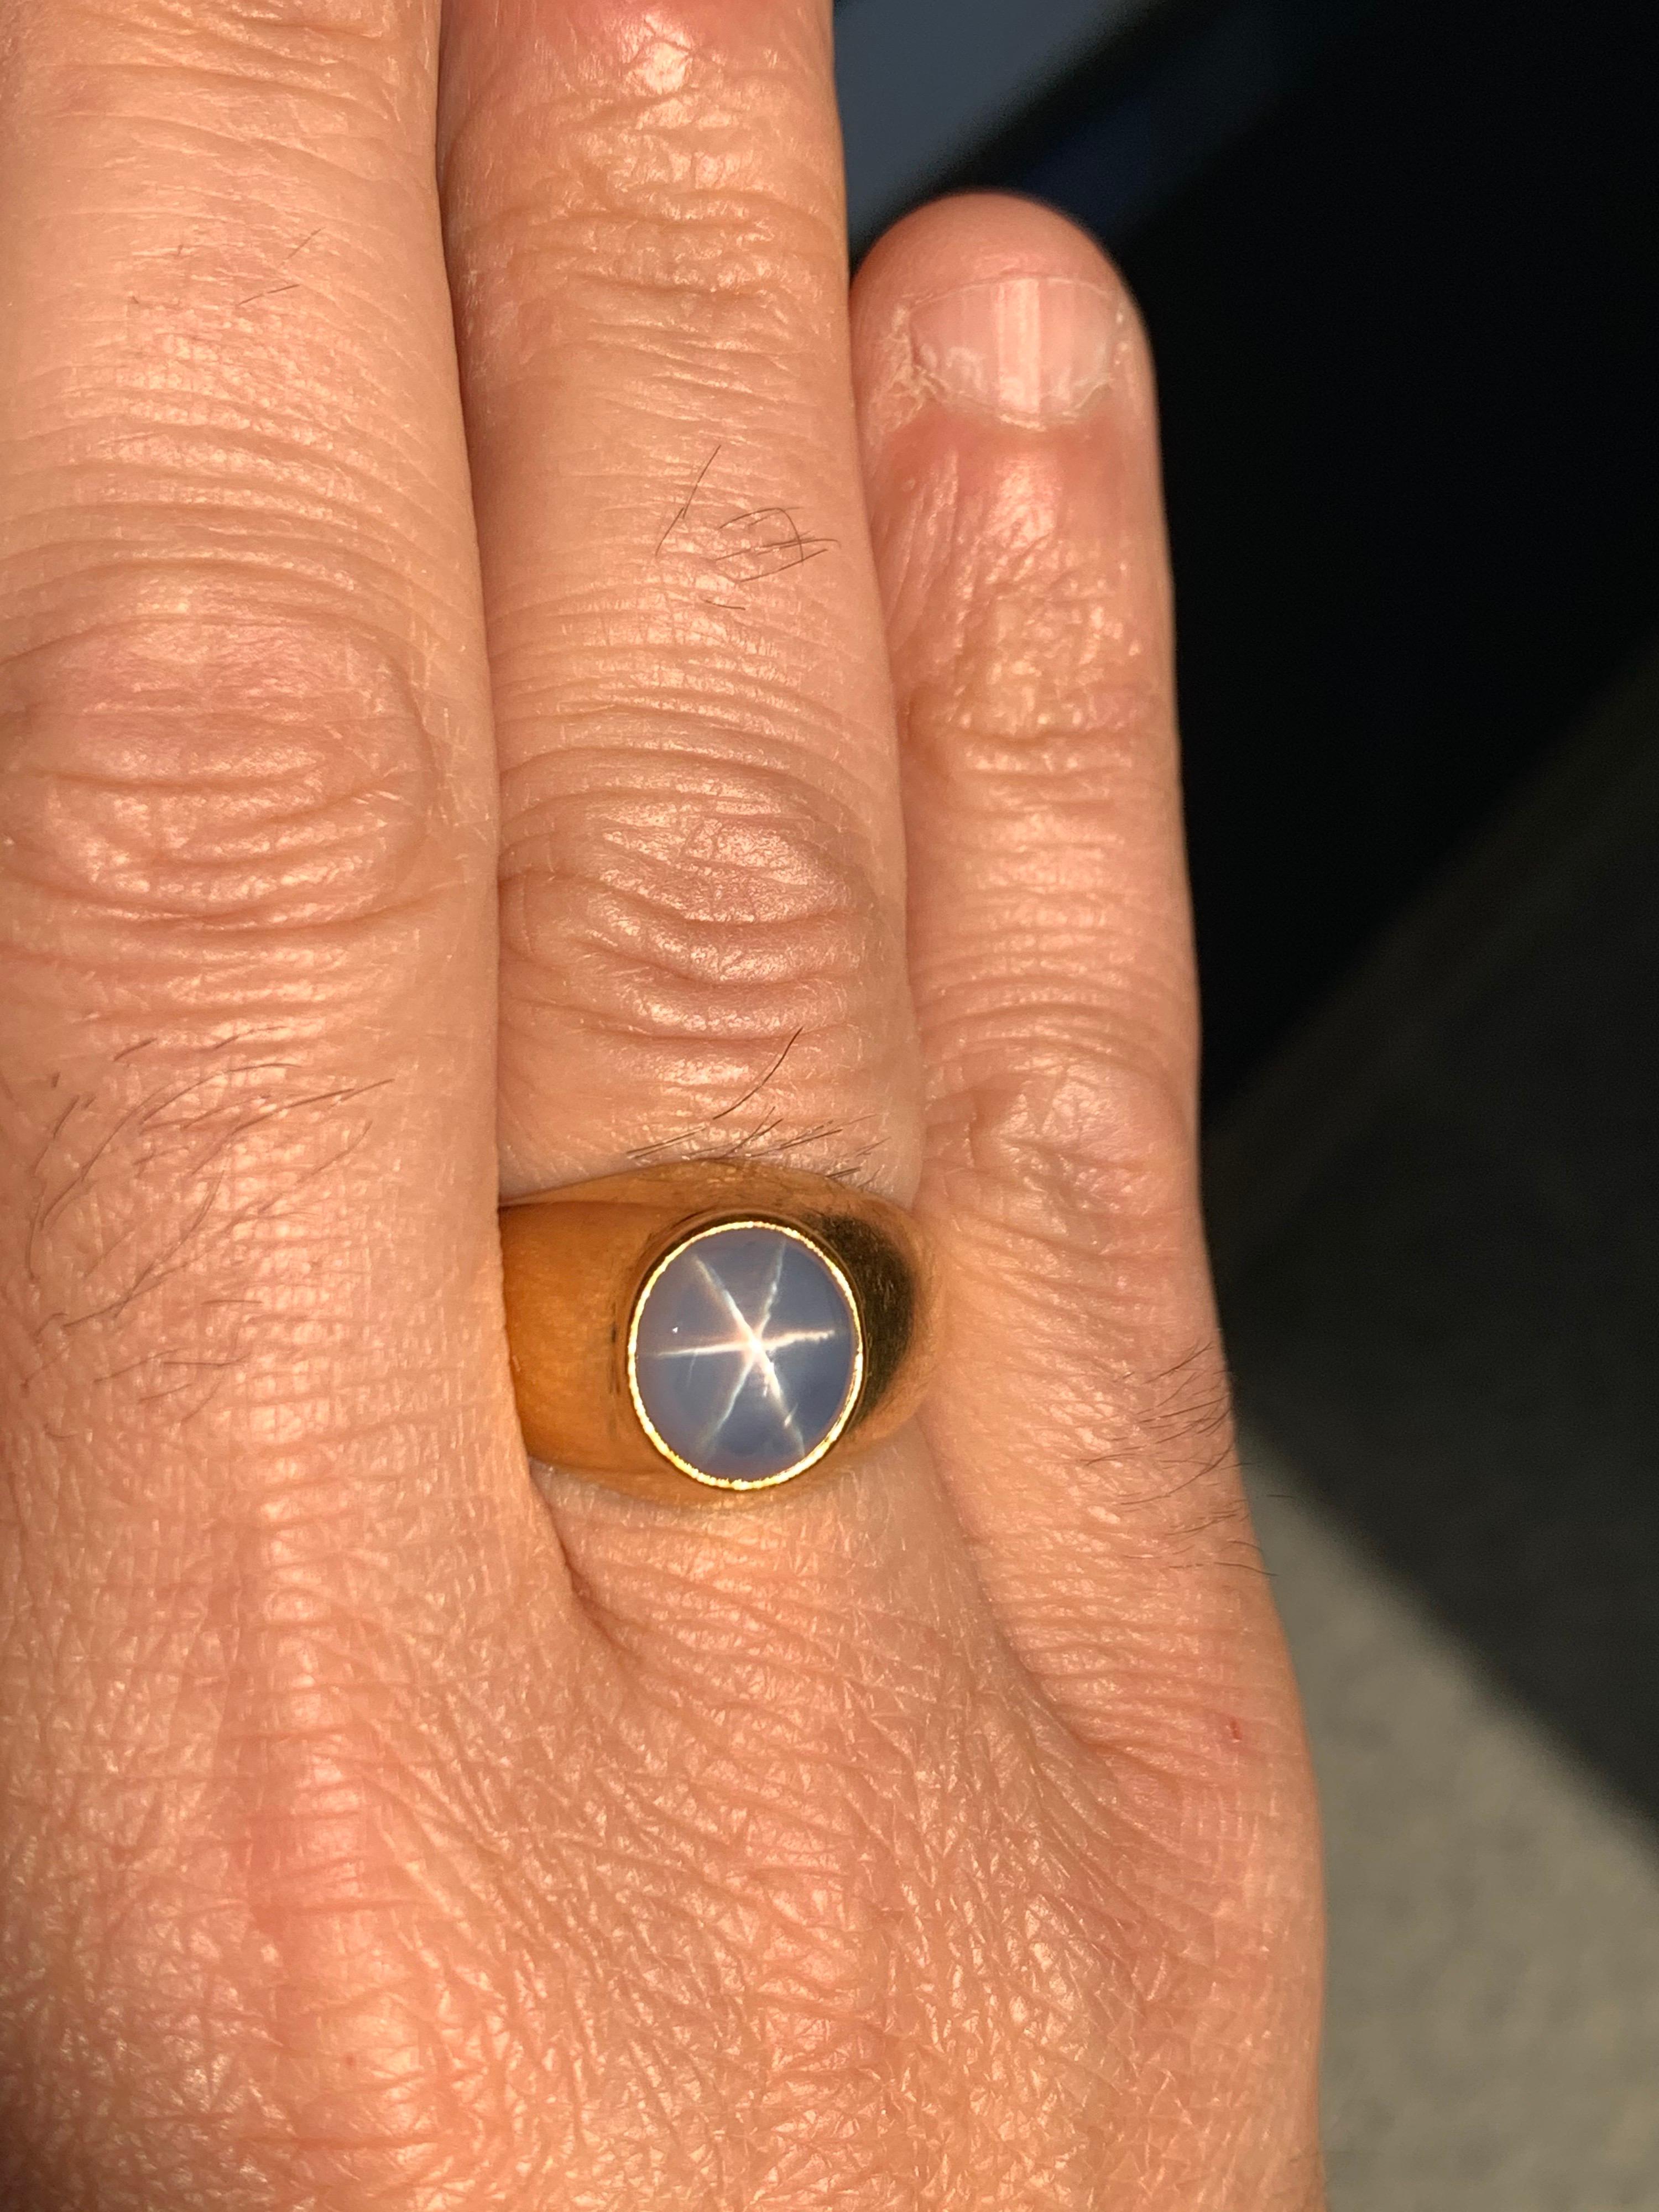 Men’s Retro 18k Yellow Gold Ring. Natural 10 Carat (approximate) Cabochon Bluish Star Sapphire measuring 11.1x10x8.6mm.

The star most visible outdoors in daylight, an accurate image of indoor lighting with star not visible is provided. 

The ring